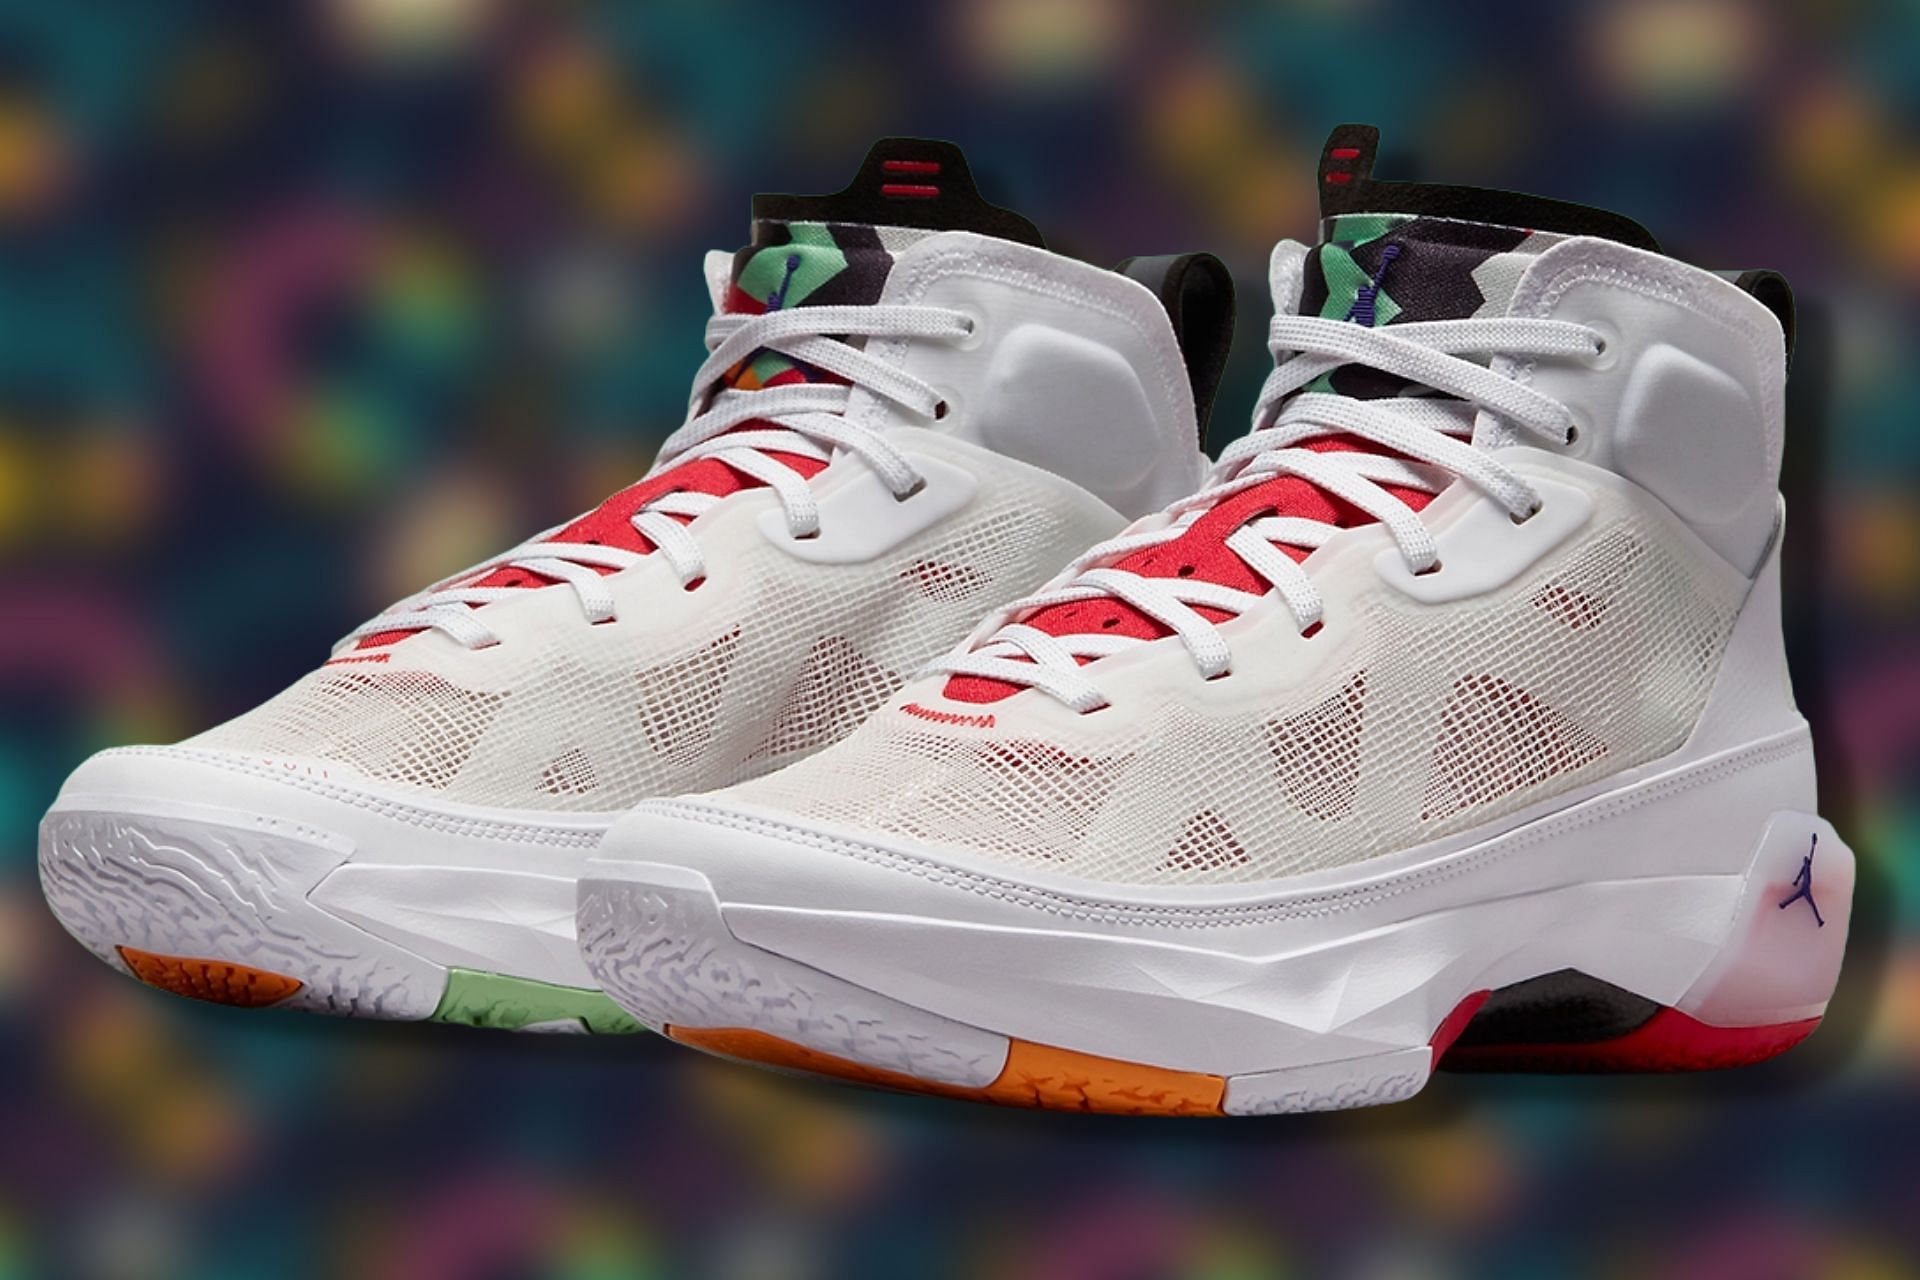 Where to buy Air Jordan 37 Hare colorway? Price, release date, and more ...